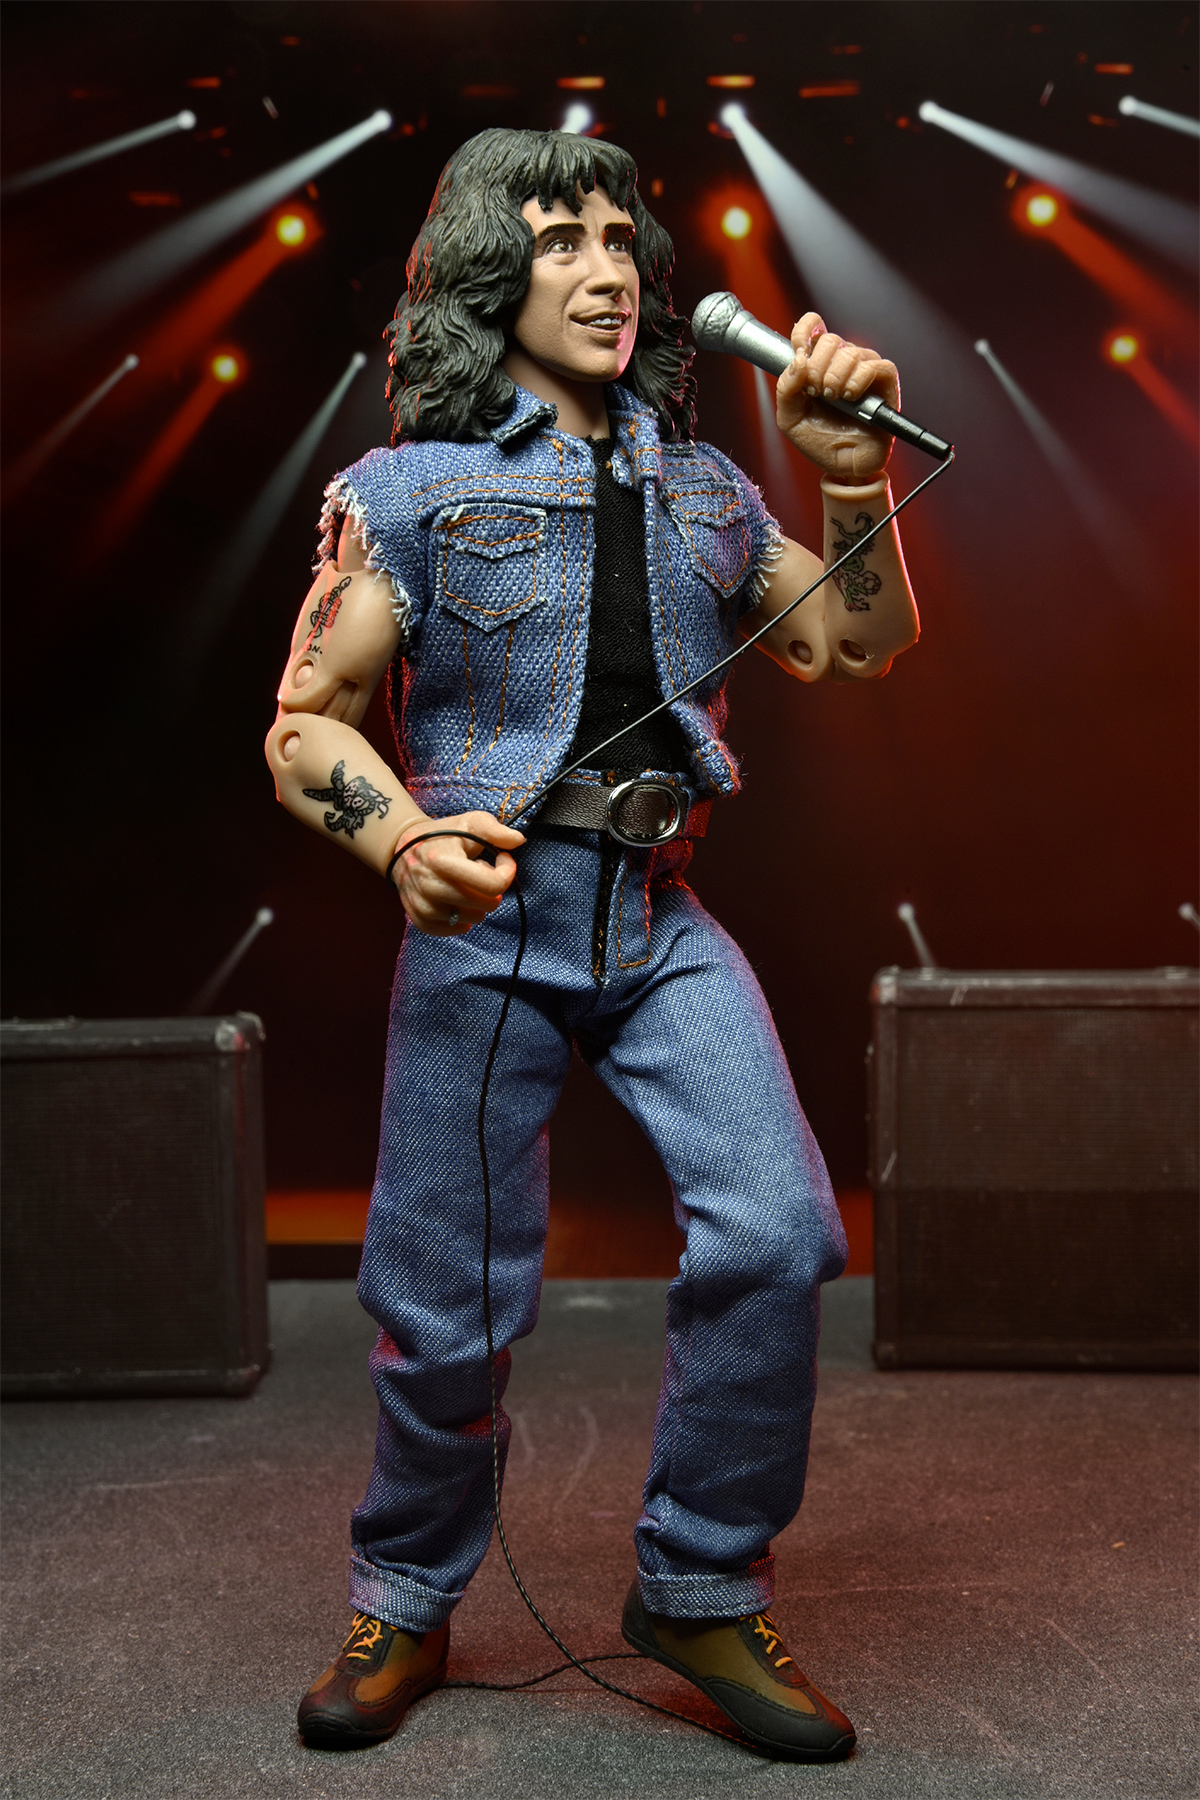 Action Figures Neca Clothed AC/DC Highway to Hell: Bon Scott e Angus Young